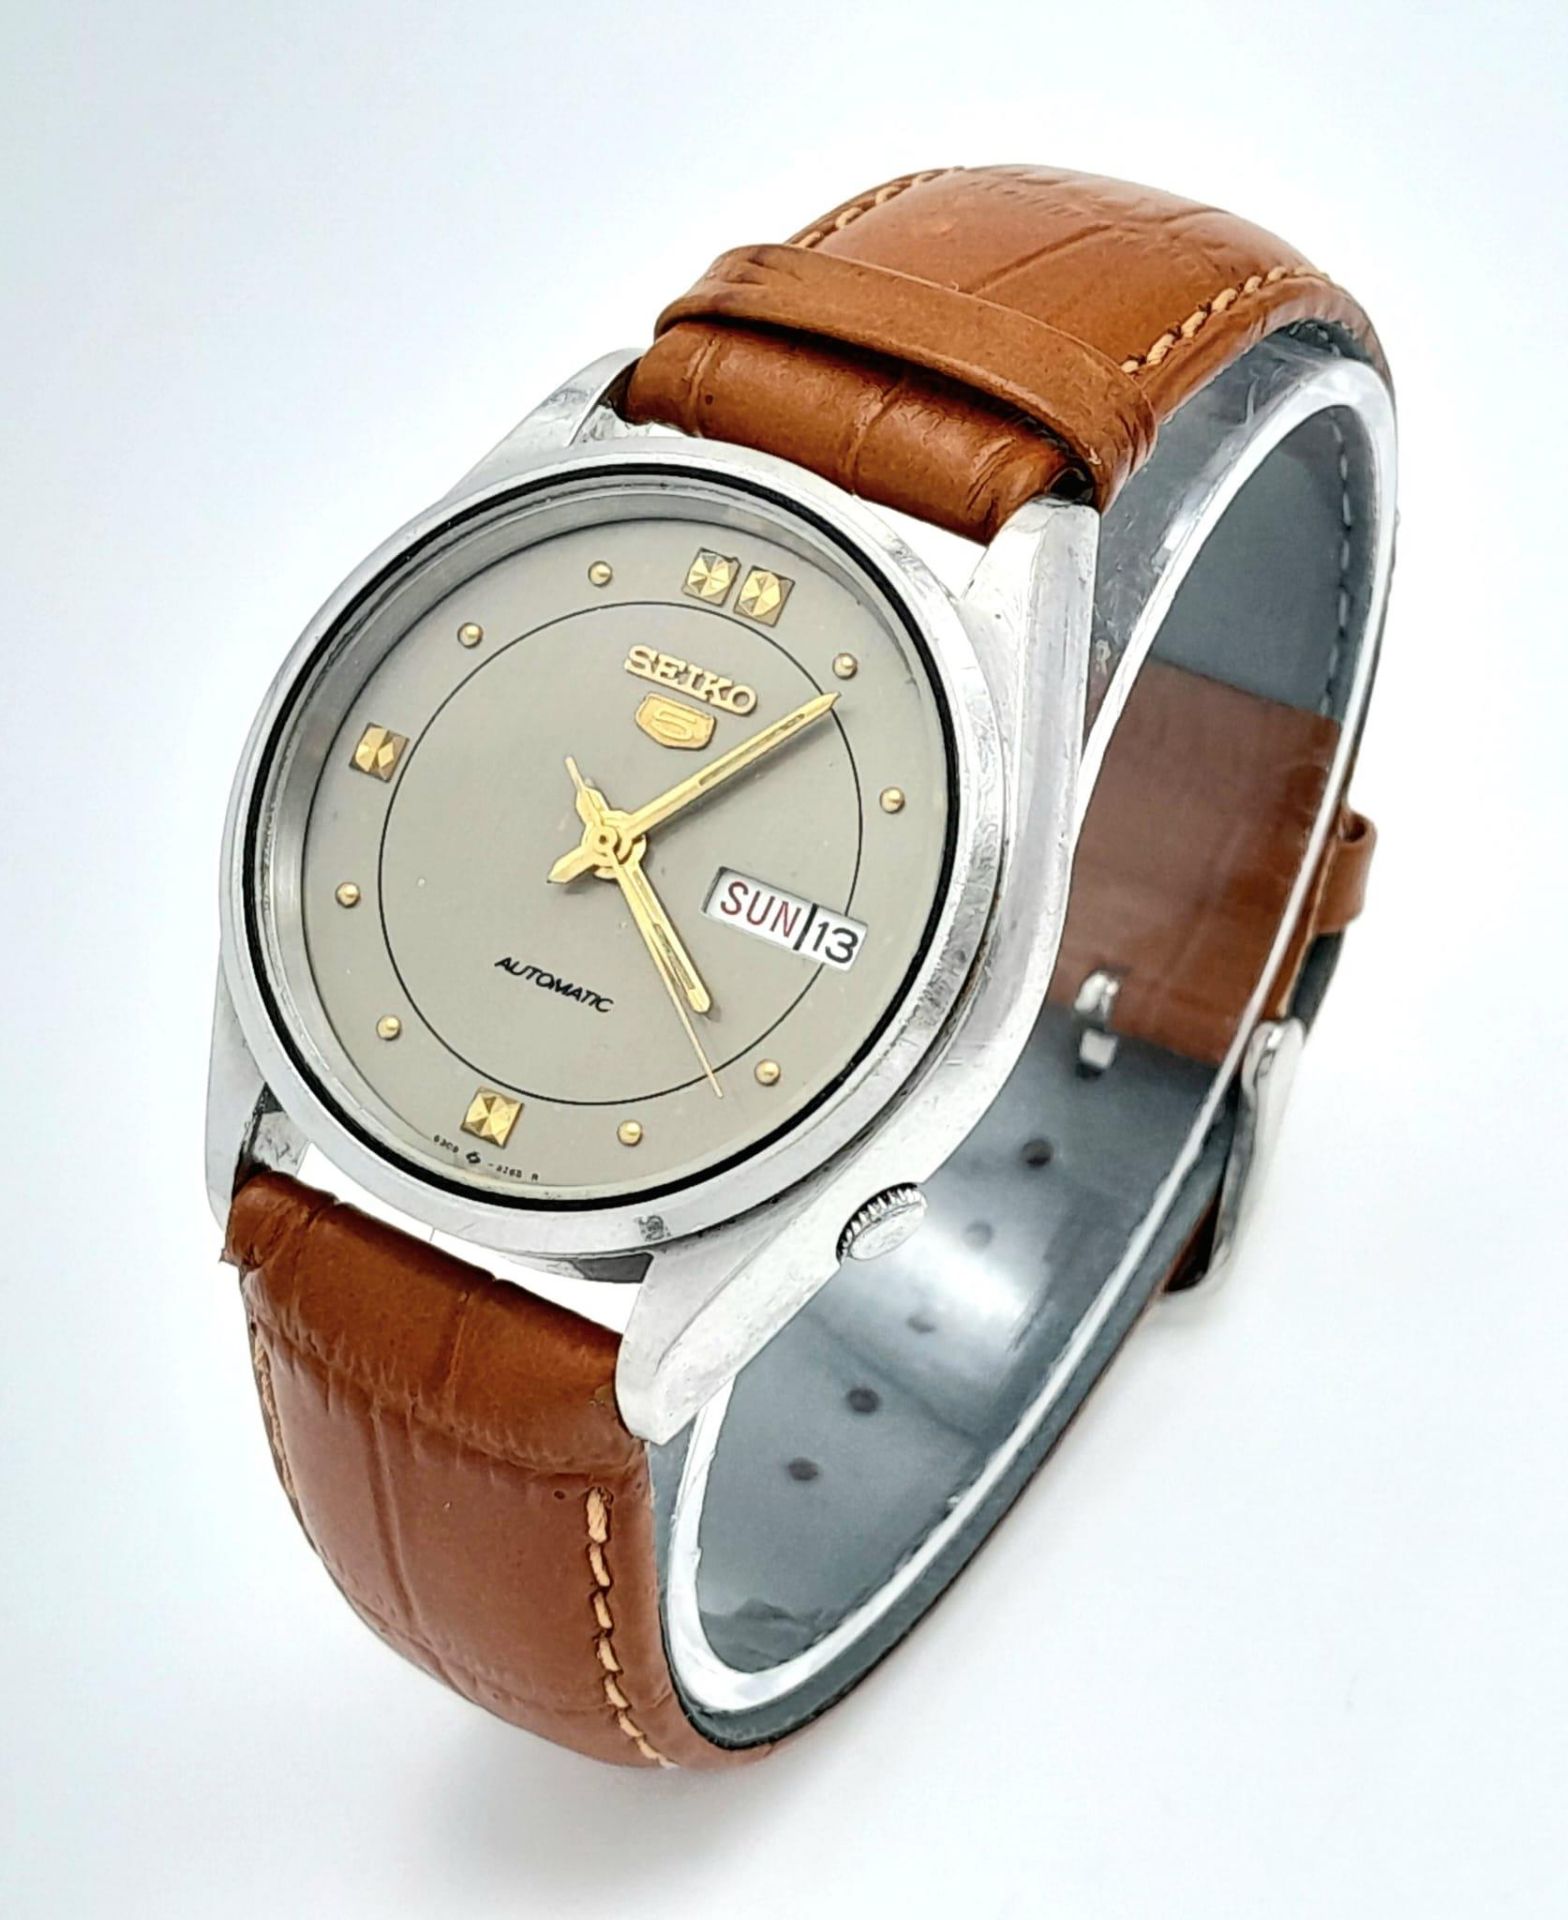 A Vintage Seiko 5 Automatic Gents Watch. Brown leather strap. Stainless steel case - 36mm. Dark grey